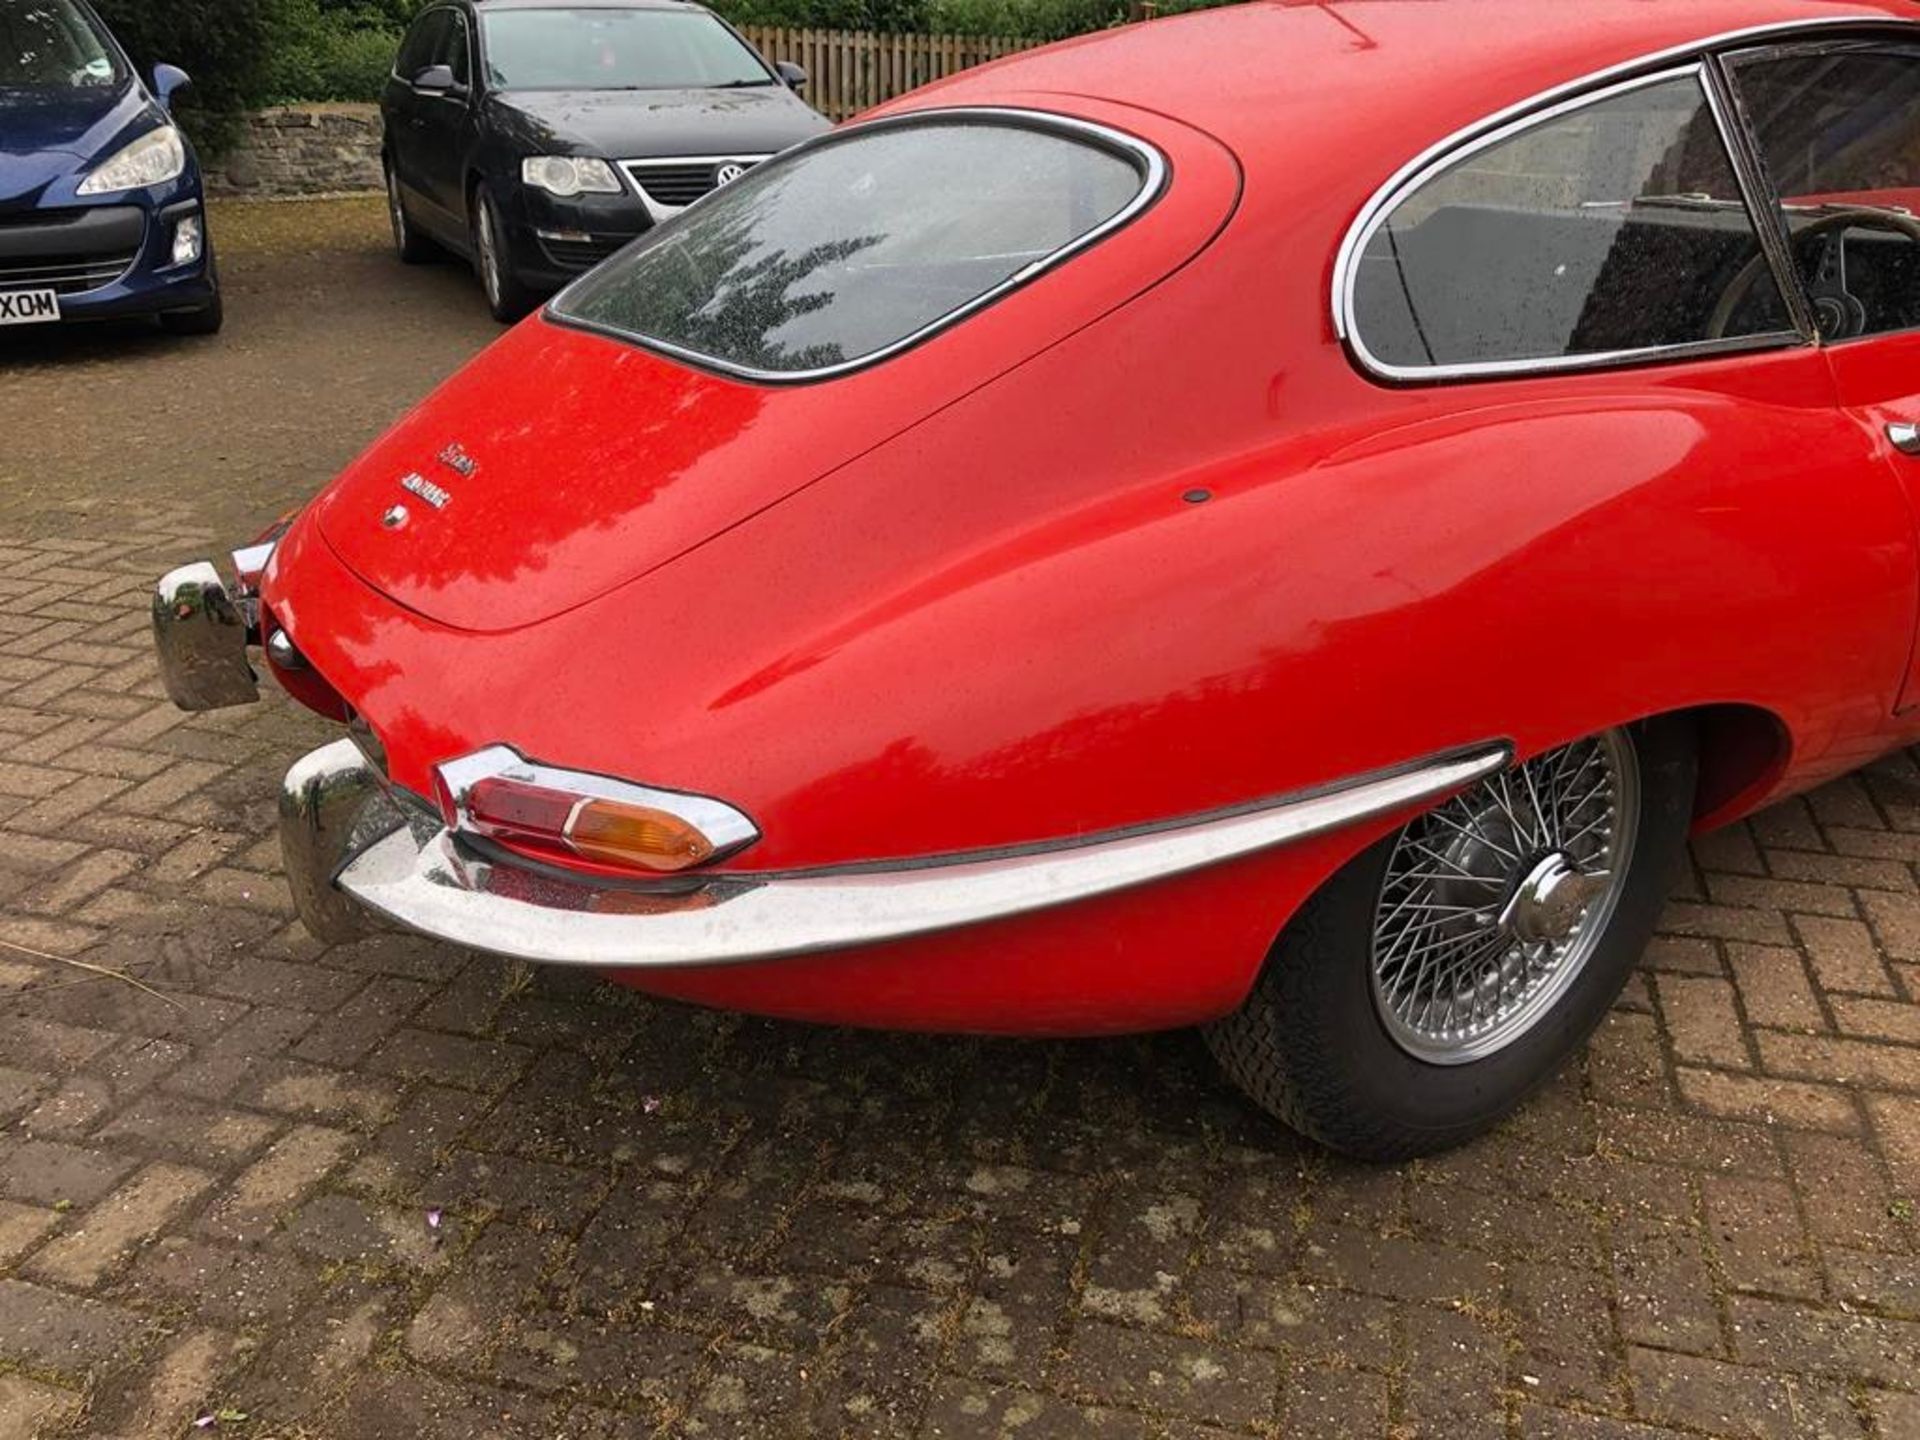 1962 Jaguar E-Type 3.8 Fixed Head Coupé Registration number 297 HBF Chassis number 860773 Engine - Image 49 of 160